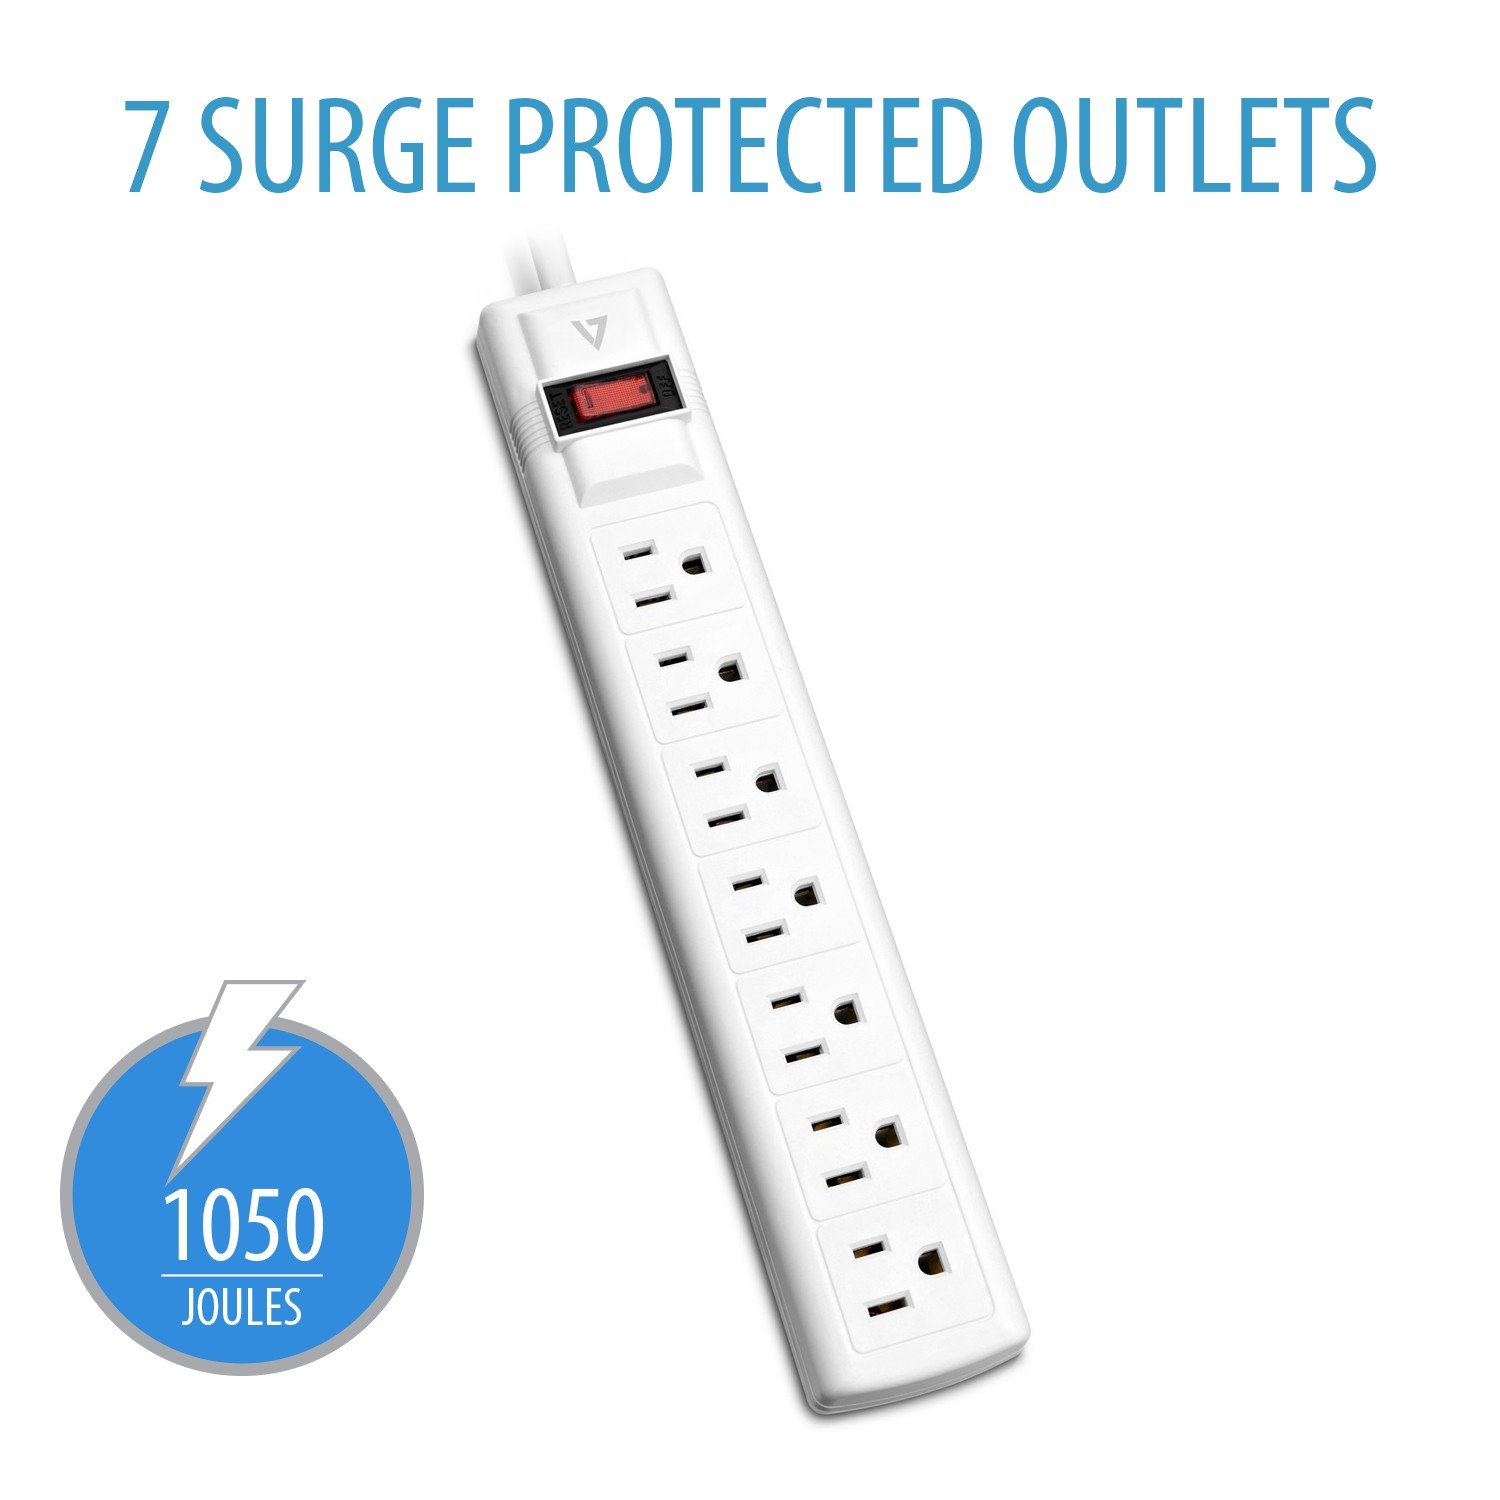 V7 7-Outlet Home/Office Surge Protector, 12 ft cord, 1050 Joules - White